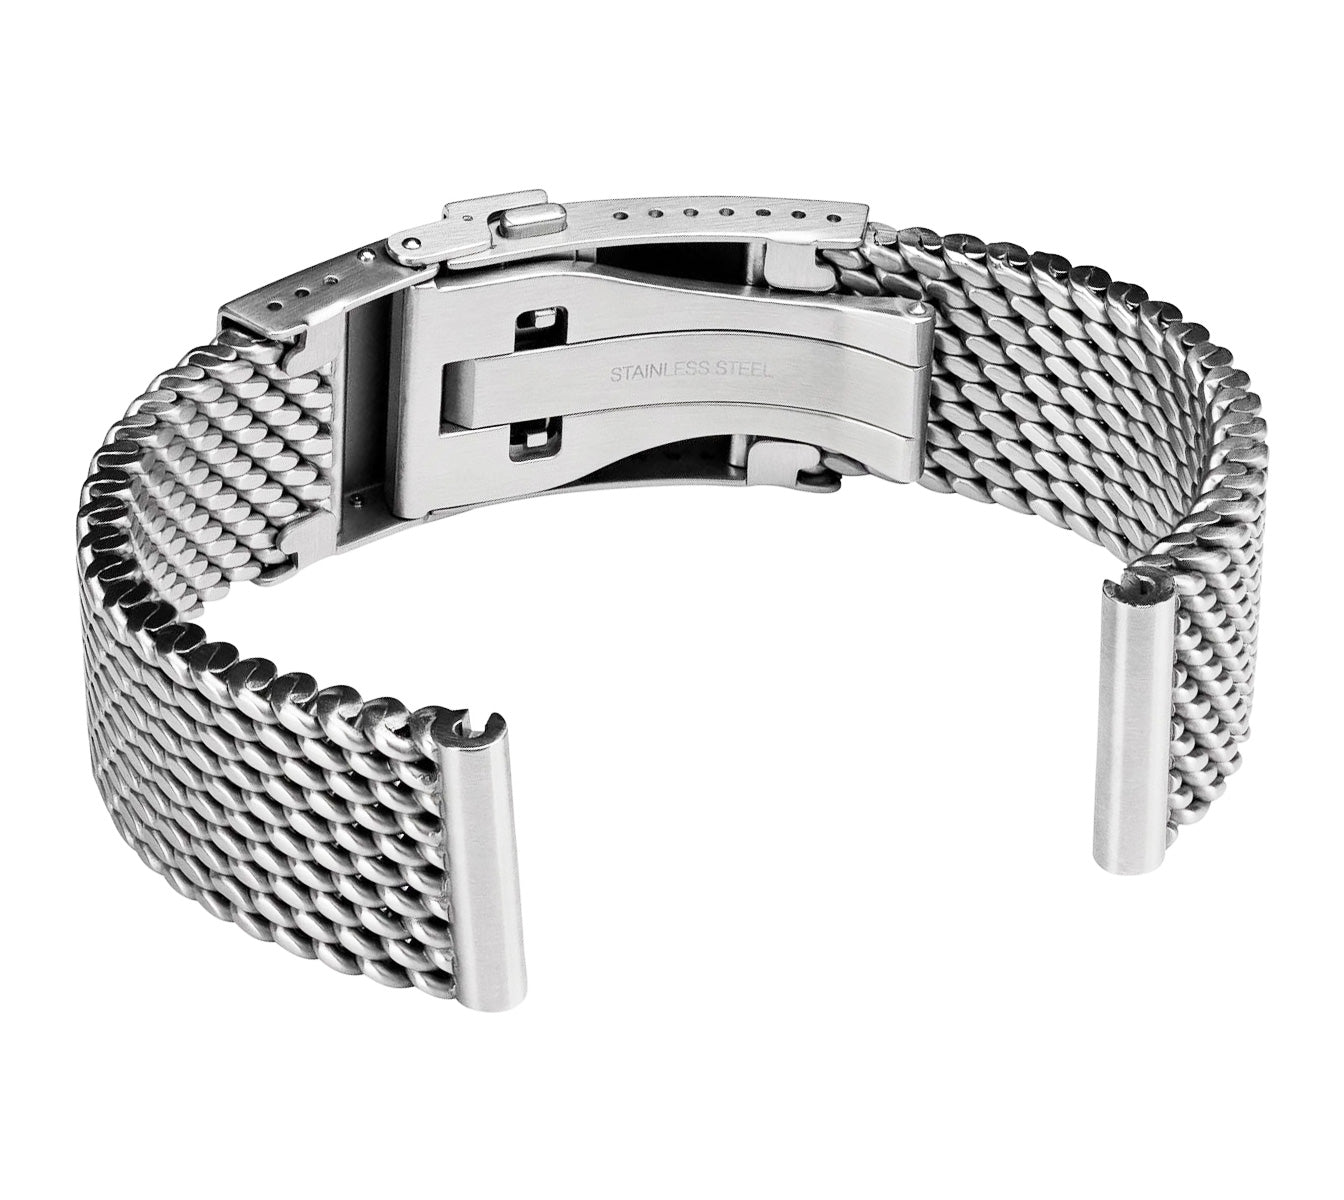 Staib Milanaise Mesh Polished Watch Bracelet with Folding Buckle 20mm ...